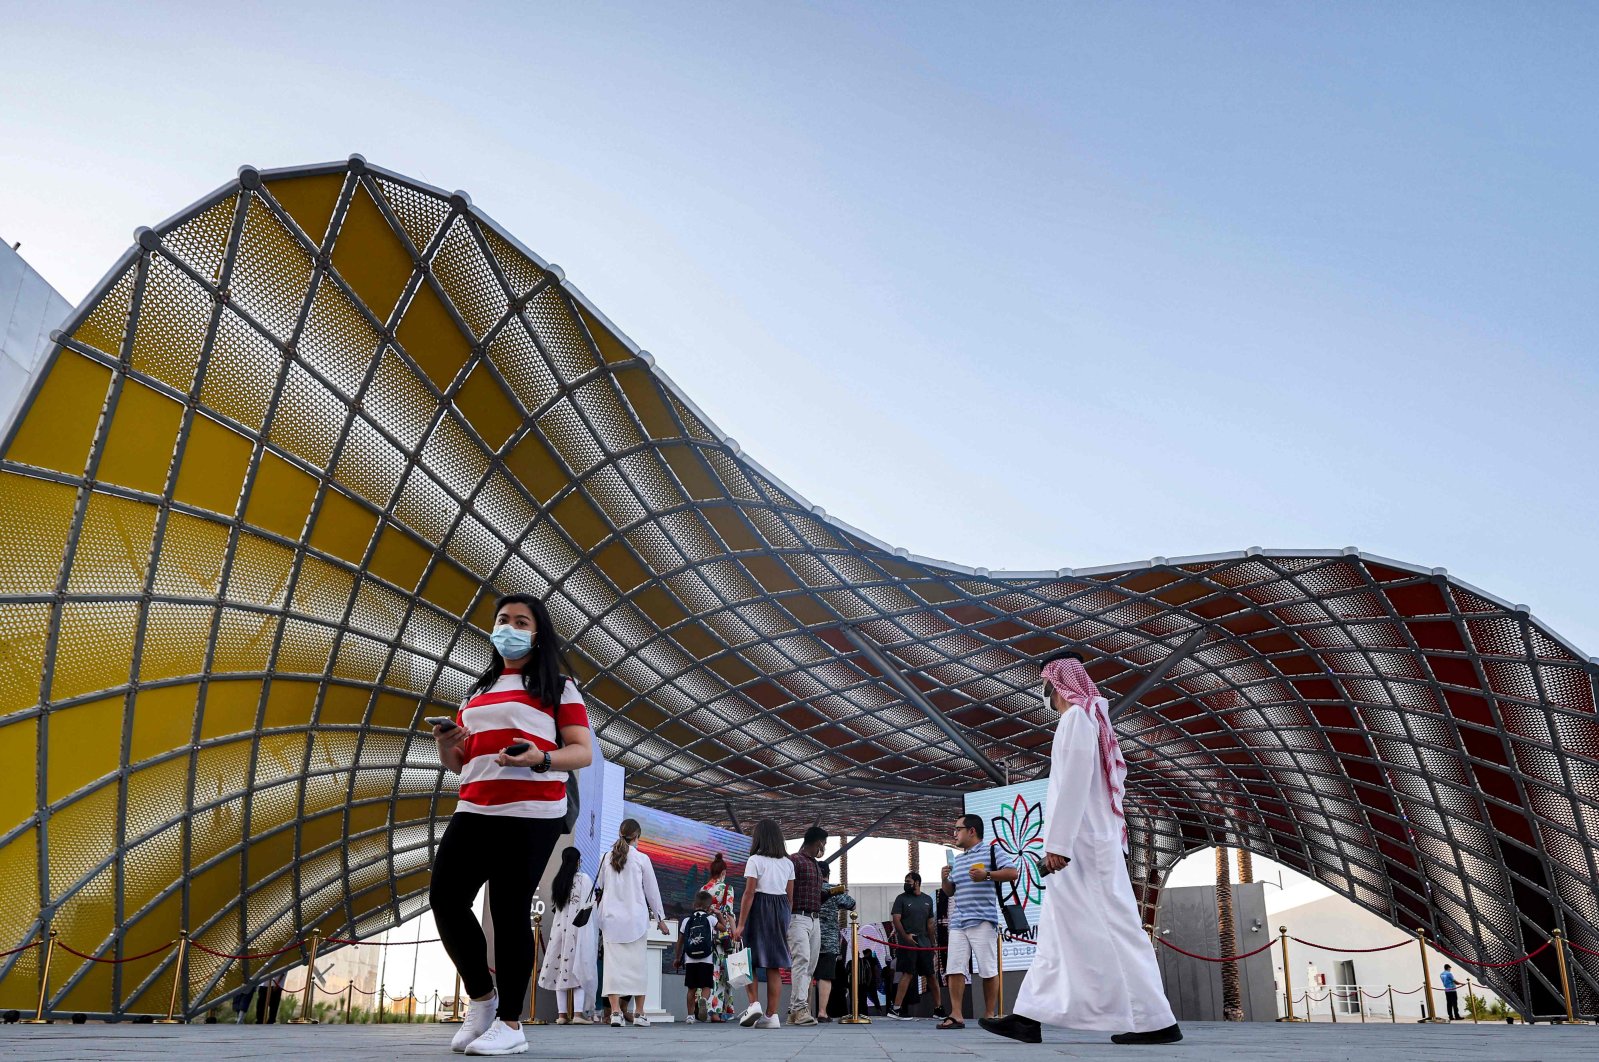 Visitors walk past the exterior of the Iraqi pavilion at the Expo 2020 in the Gulf Emirate of Dubai, on Oct. 13, 2021. (Photo by Karim SAHIB / AFP)